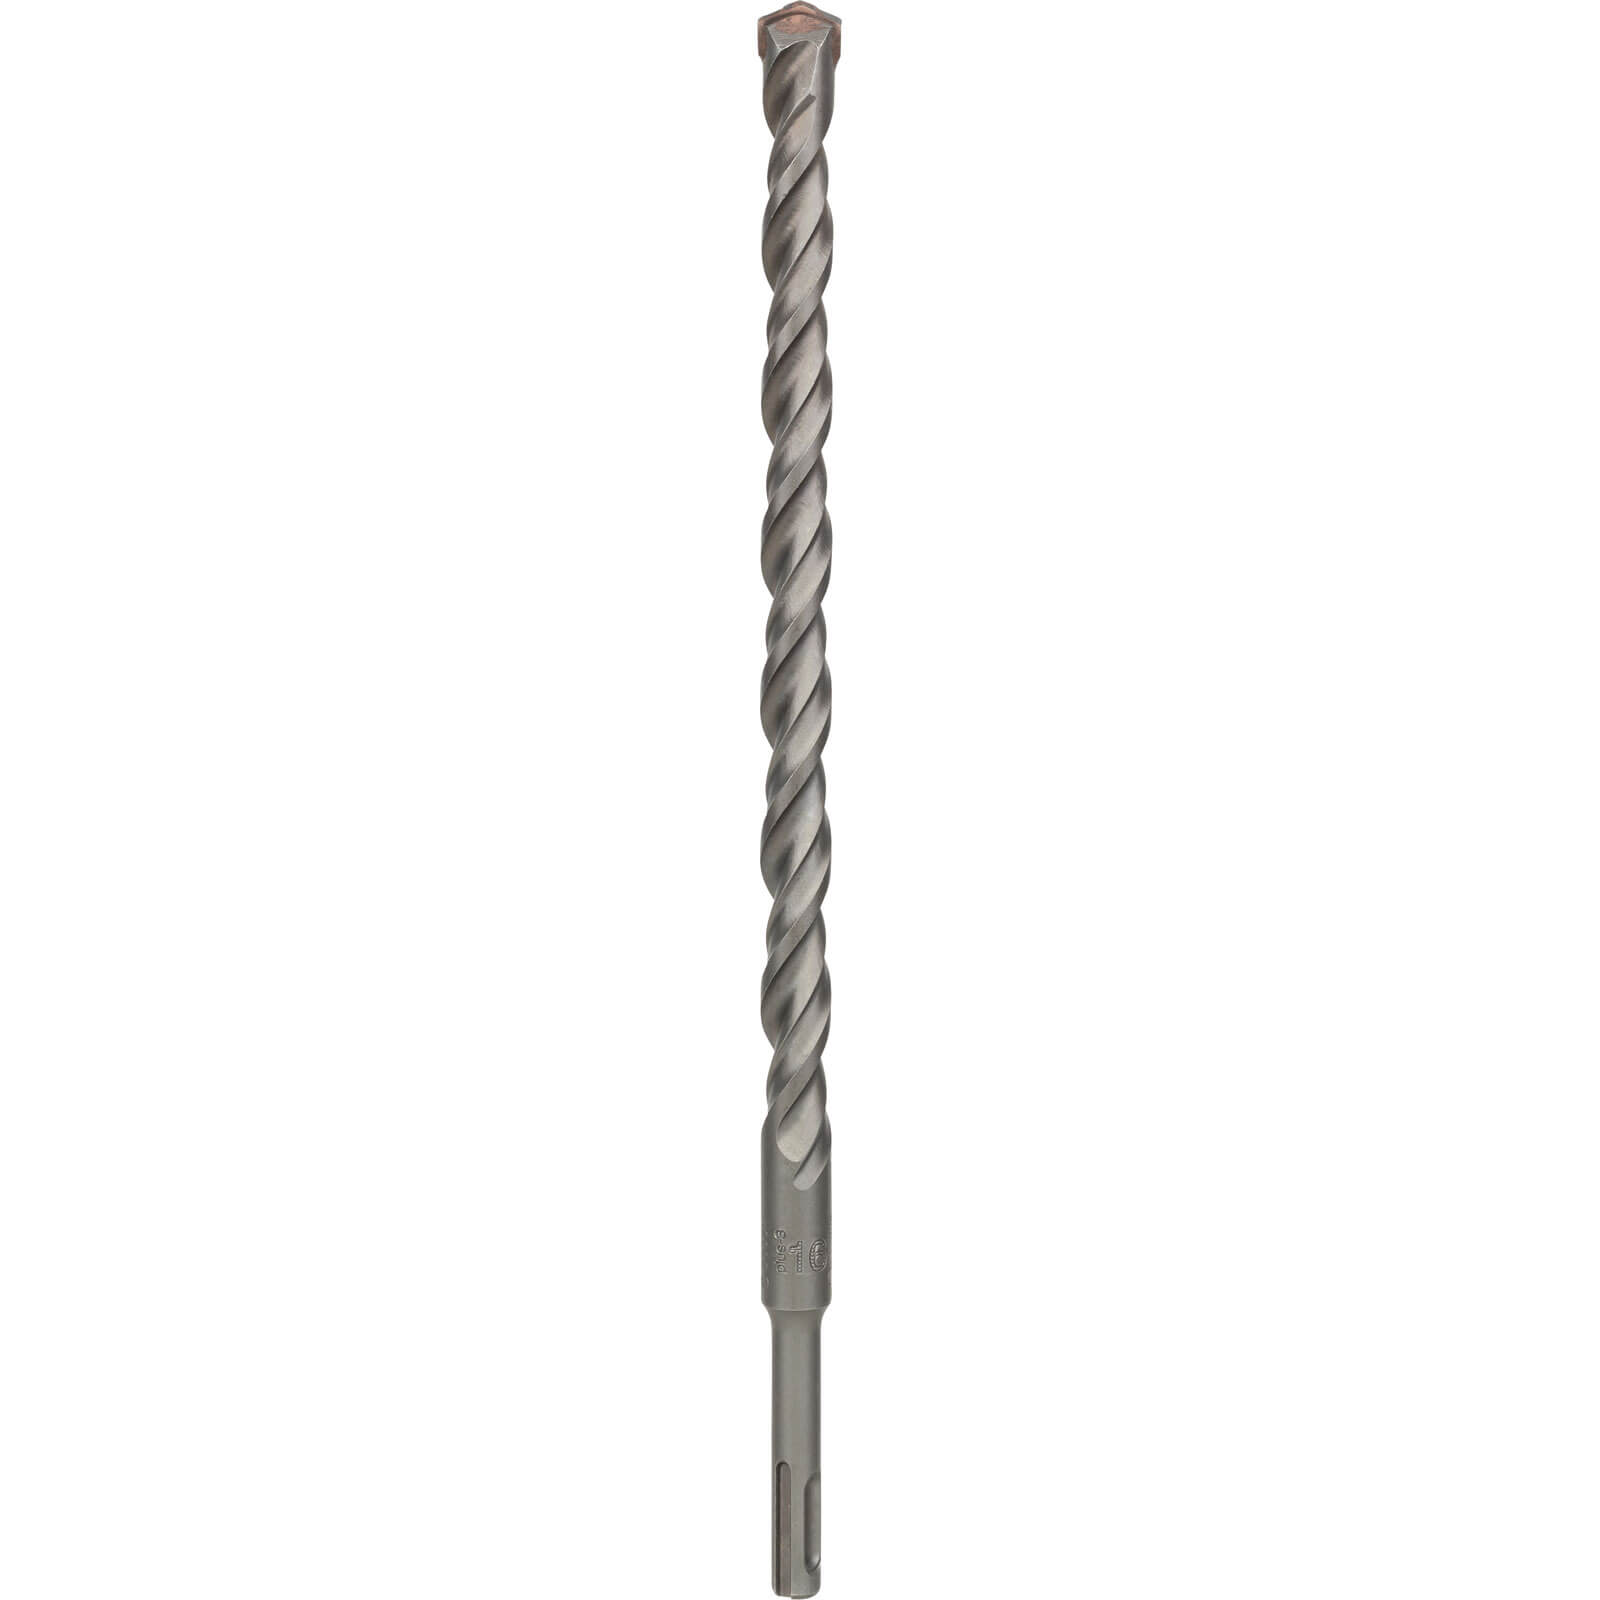 Image of Bosch Series 3 SDS Plus Masonry Drill Bit 16mm 310mm Pack of 1